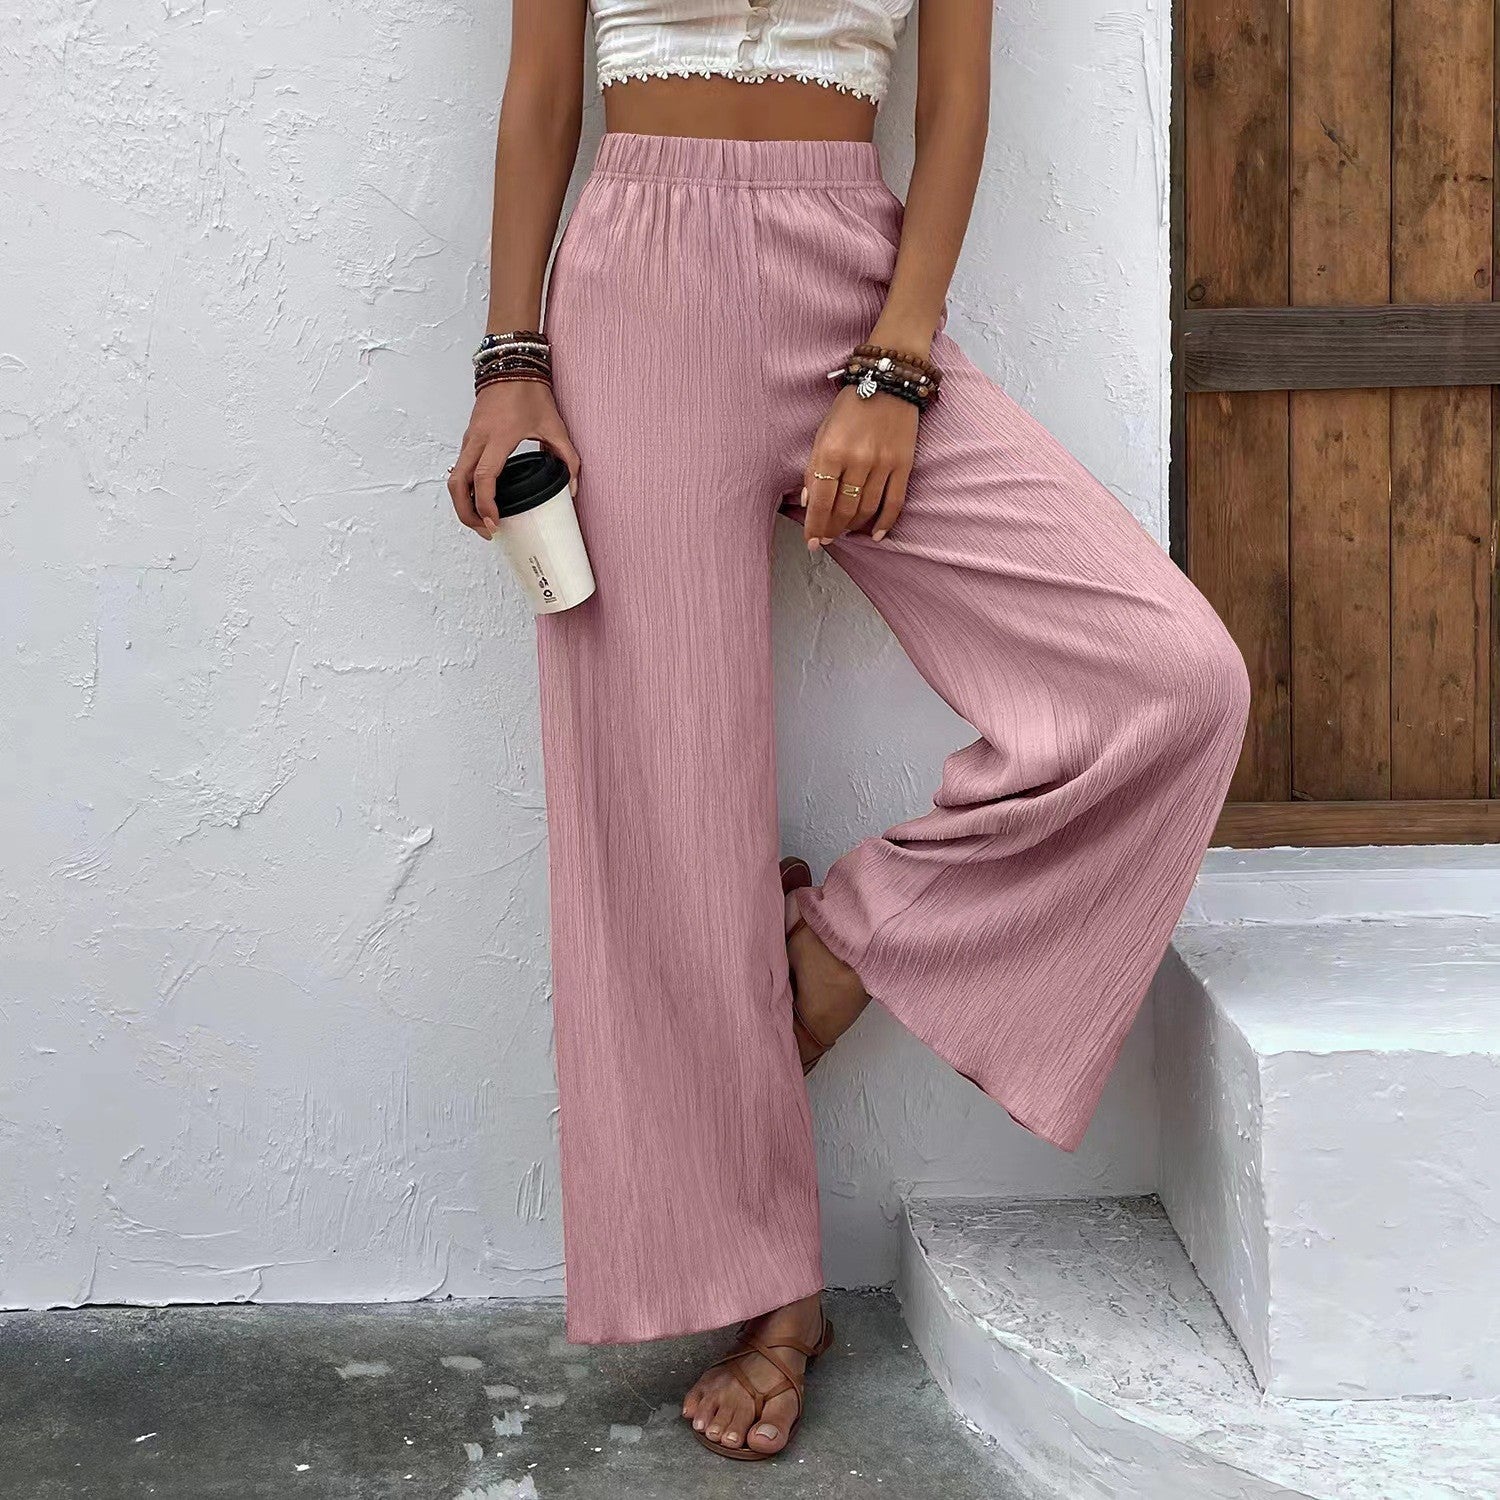 Casual Wide Legs Long Pants for Women-Pants-Black-S-Free Shipping Leatheretro